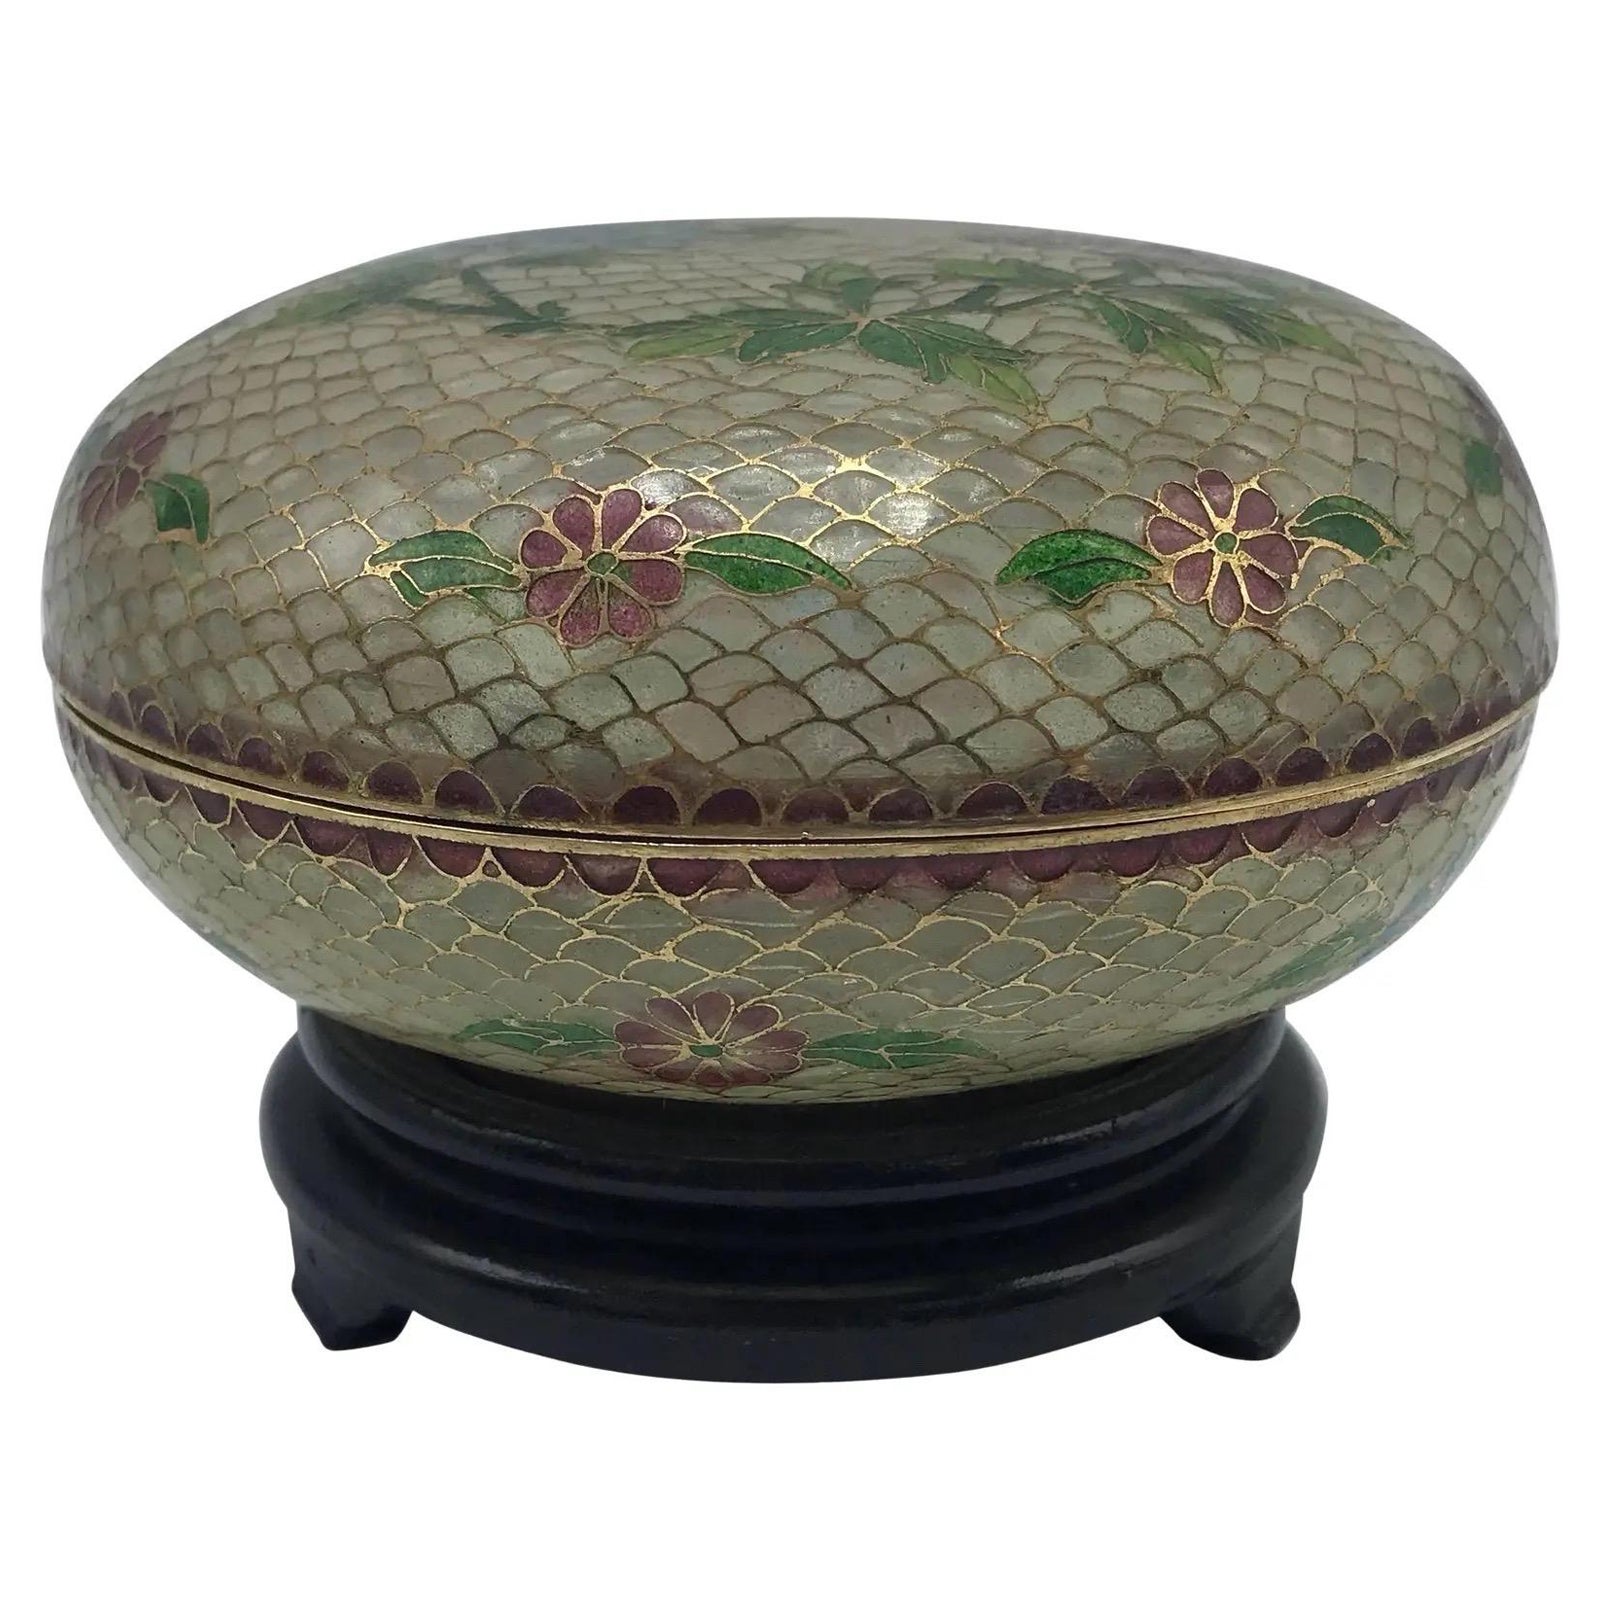 19th Century French Plique a Jour Cloisonné Mosaic Lidded Bowl on Stand For Sale